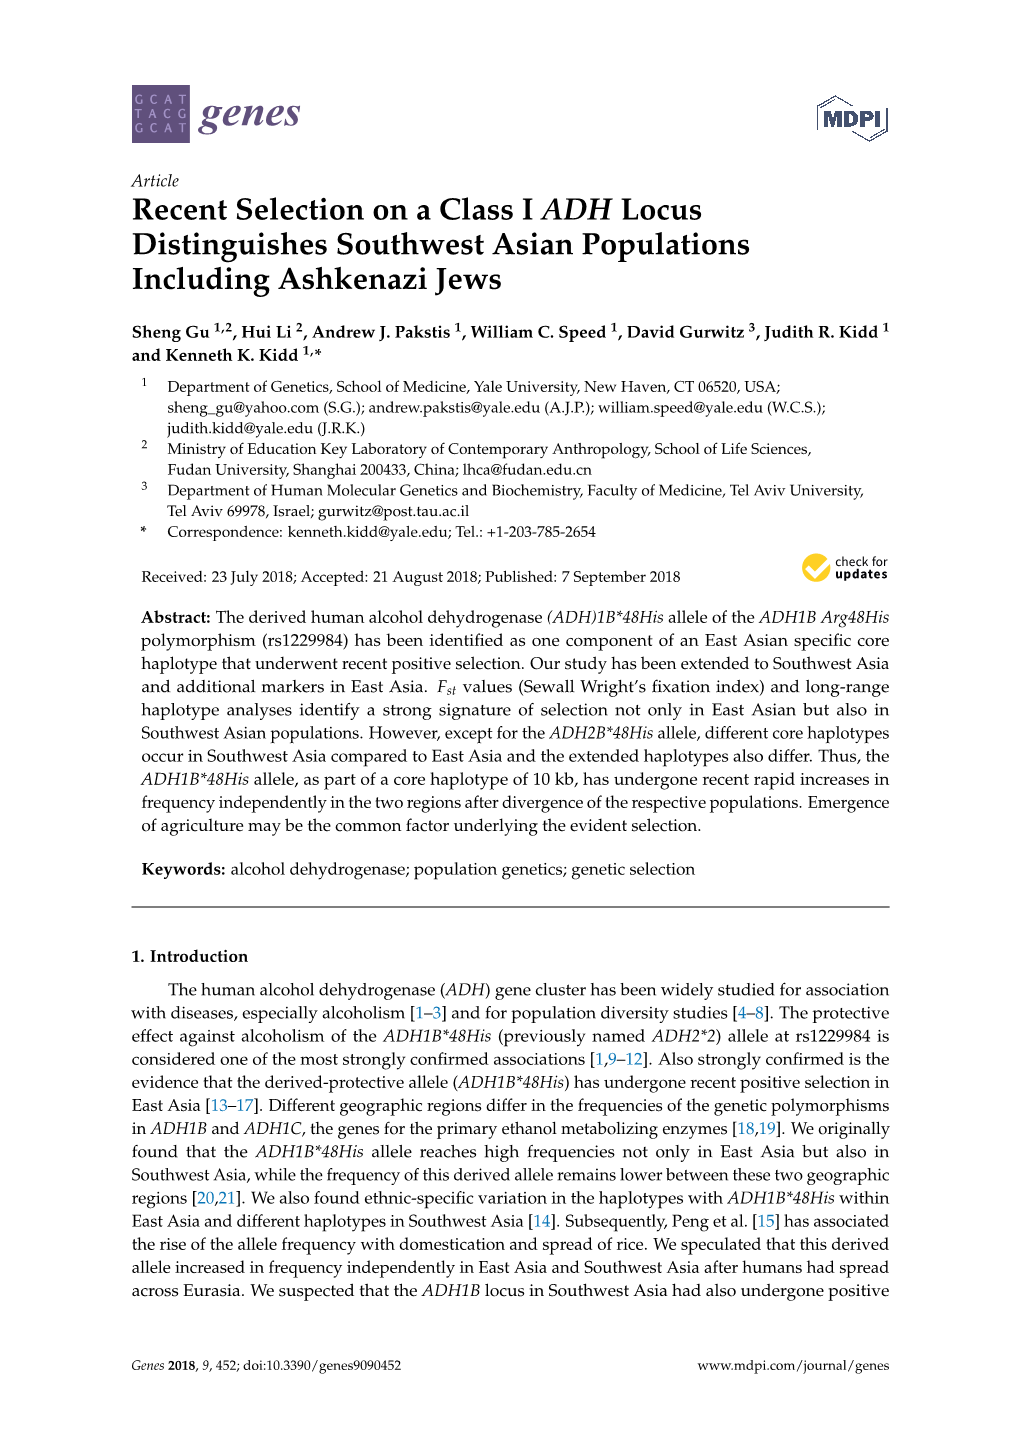 Recent Selection on a Class I ADH Locus Distinguishes Southwest Asian Populations Including Ashkenazi Jews